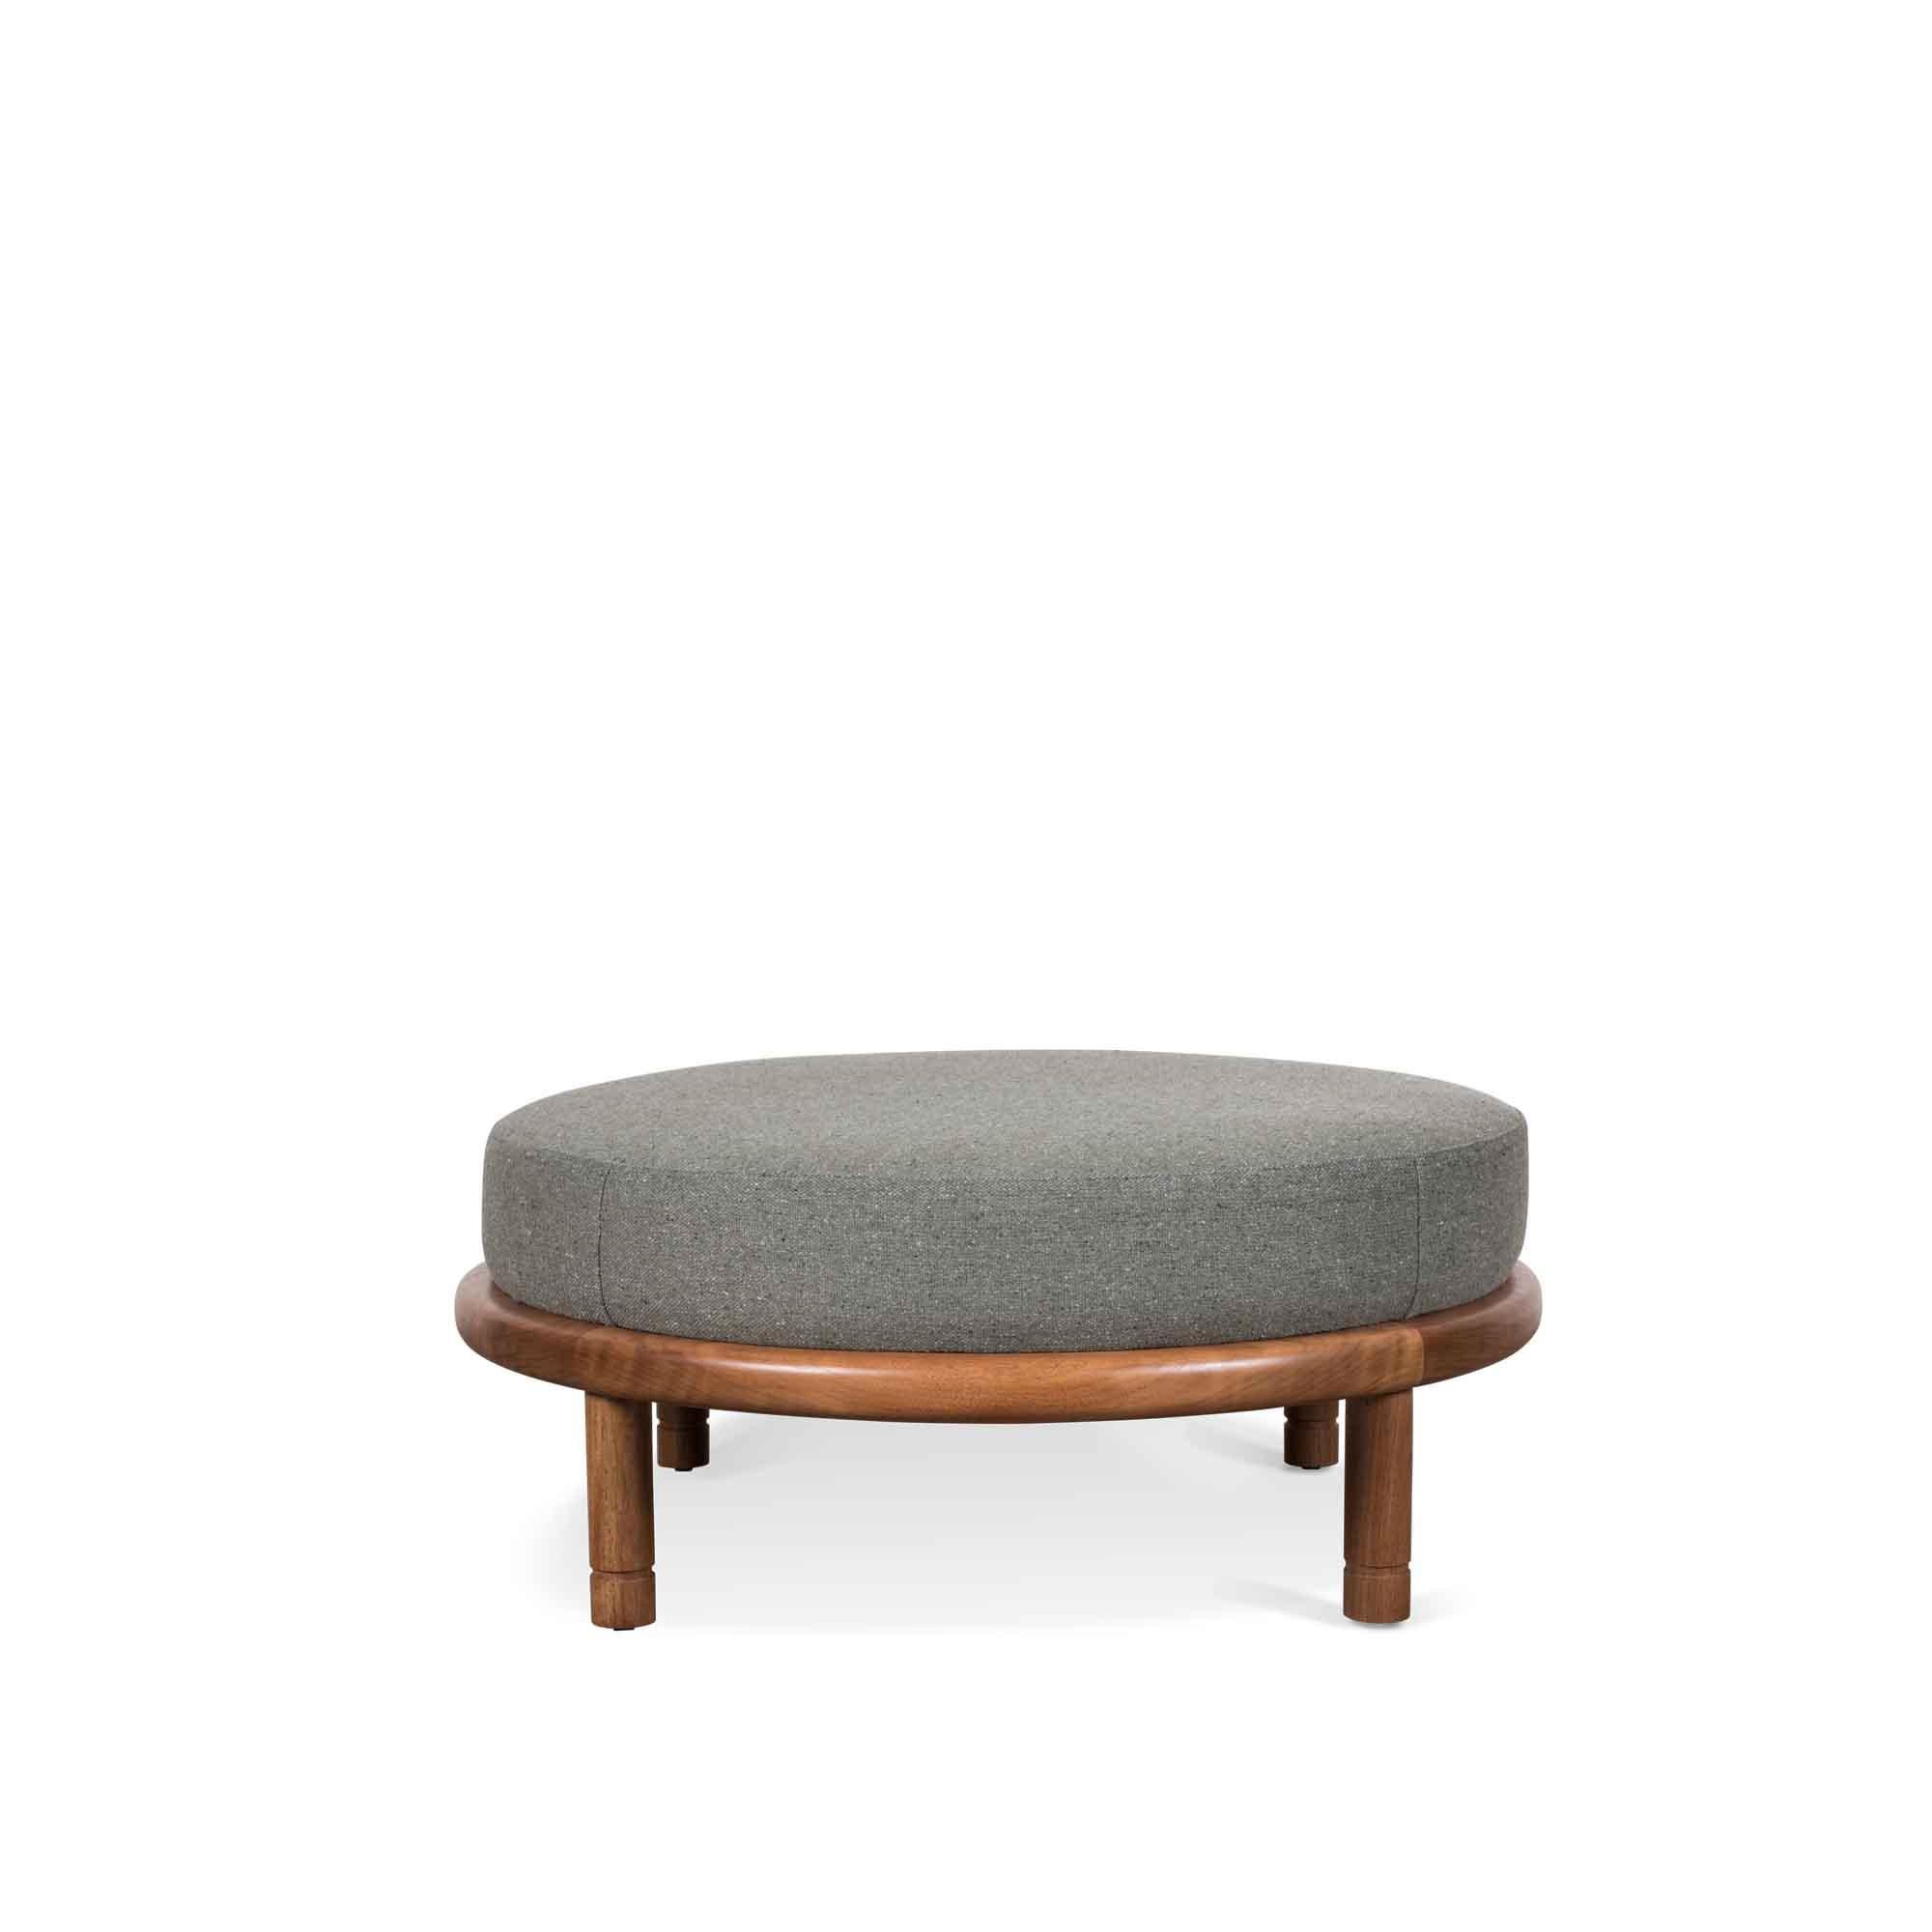 Walnut Moreno ottoman by Lawson-Fenning. The Moreno Ottoman features a round solid wood base with four cylindrical legs and an upholstered top. Available in American walnut or white oak. 

 The Lawson-Fenning Collection is designed and handmade in